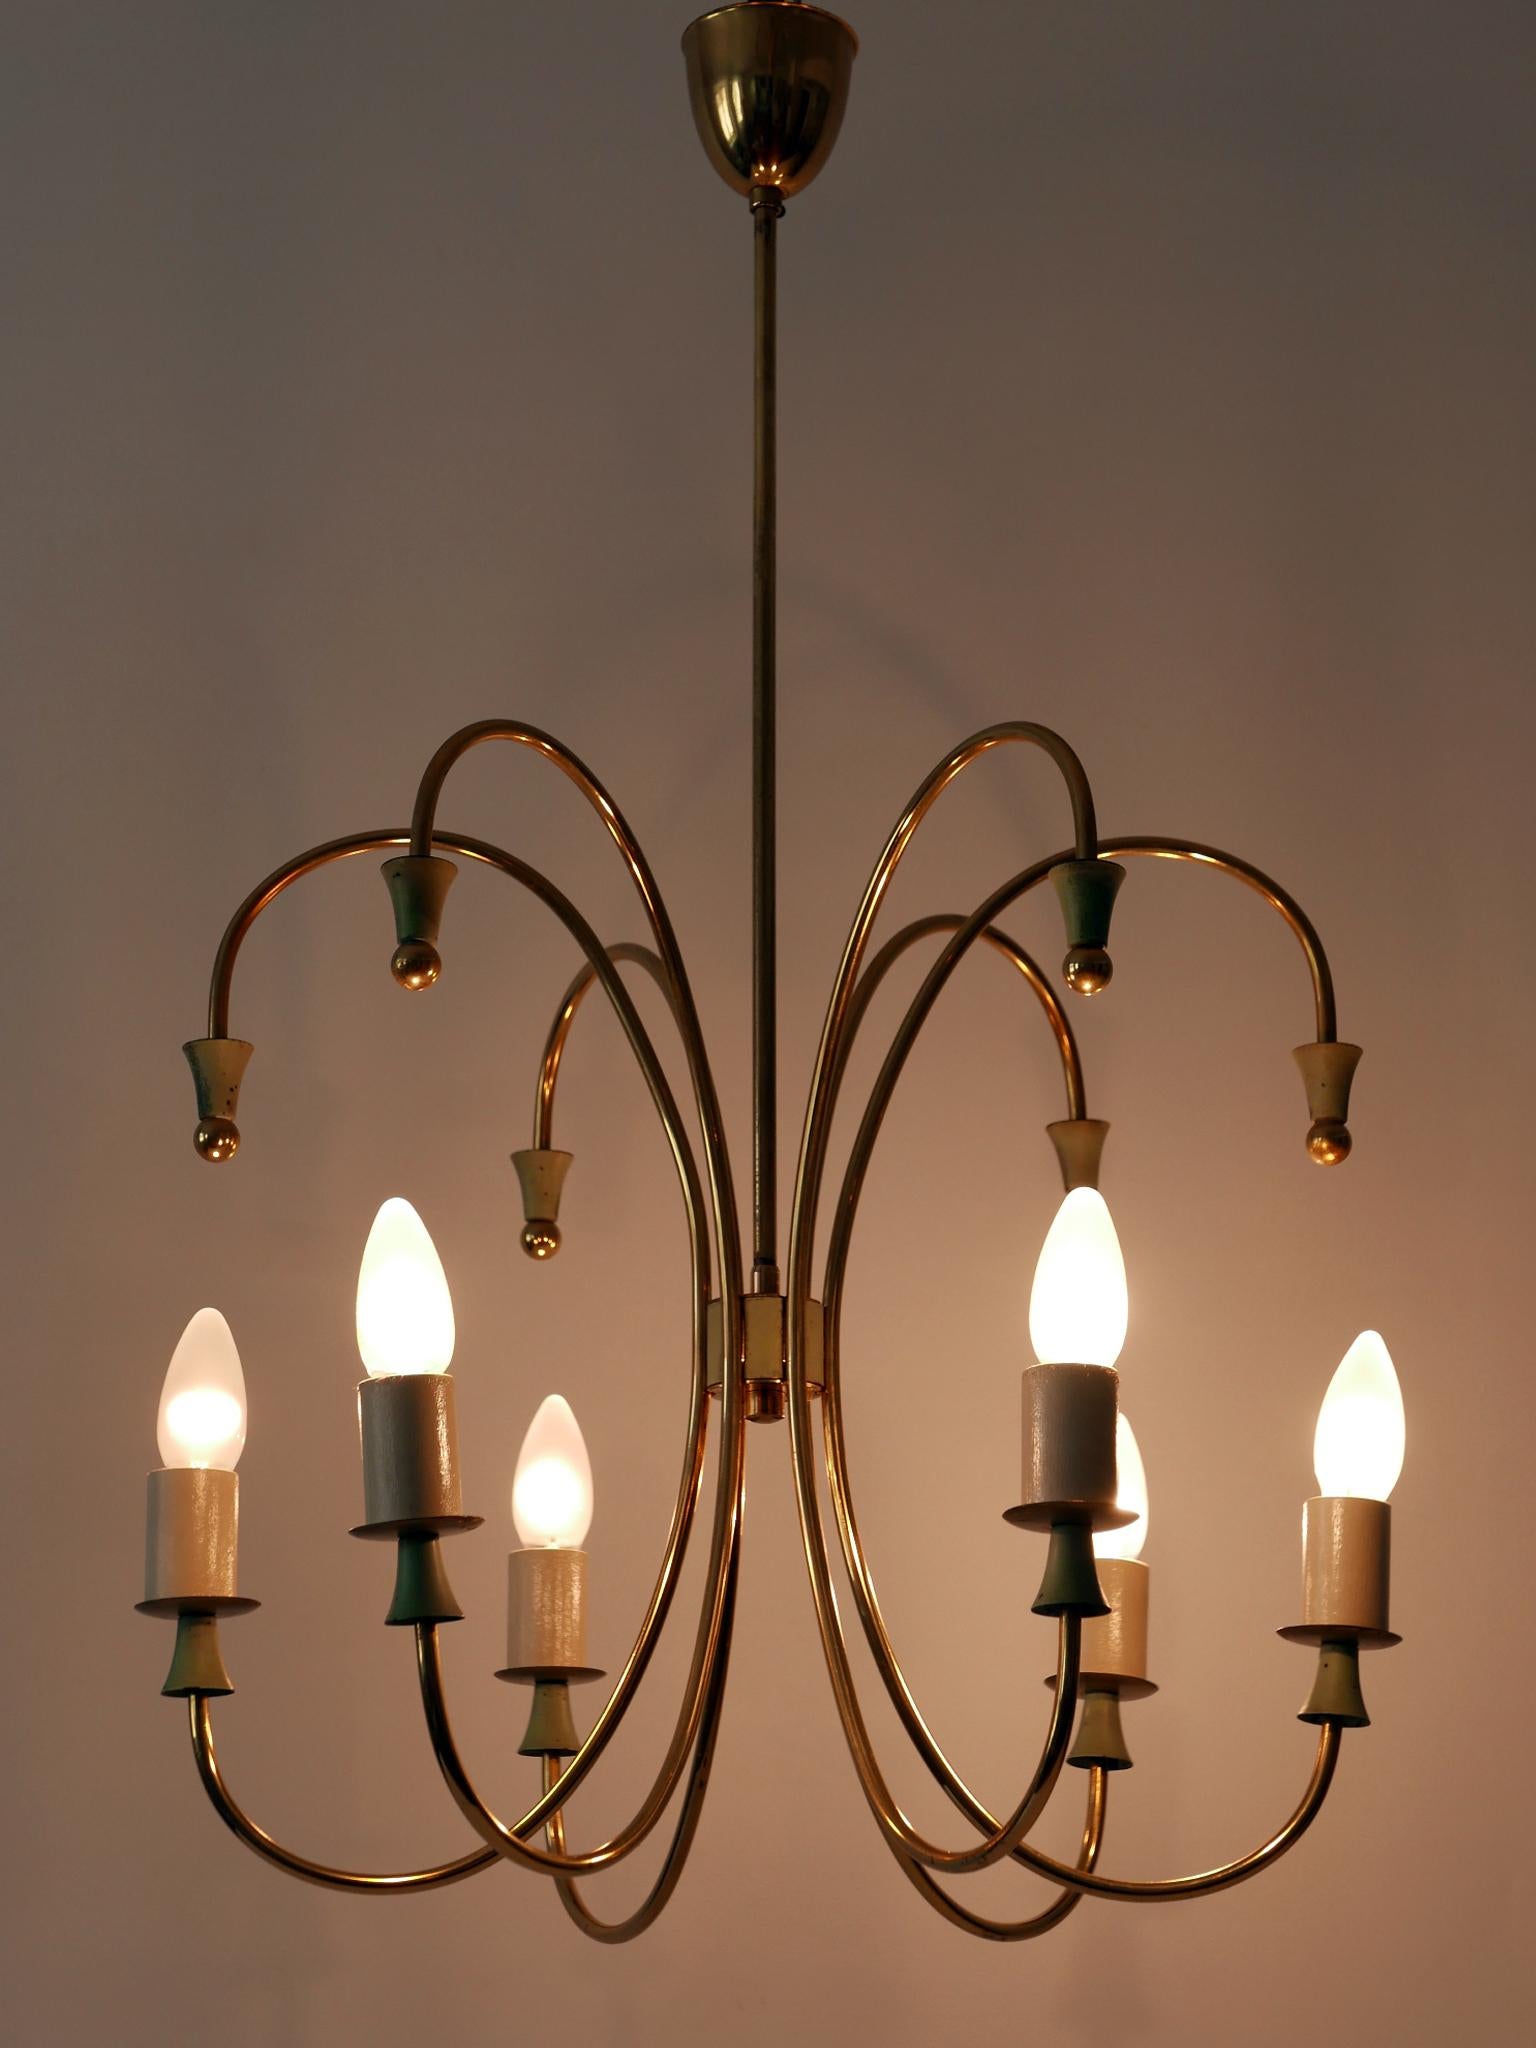 Exceptional six-armed Mid-Century Modern Sputnik chandelier or pendant lamp. Designed and manufactured in 1950s, Germany.

Executed in brass, the chandelier or pendant lamp needs 6 x E14 / E12 screw fit bulbs. It is rewired, works both with 110 /